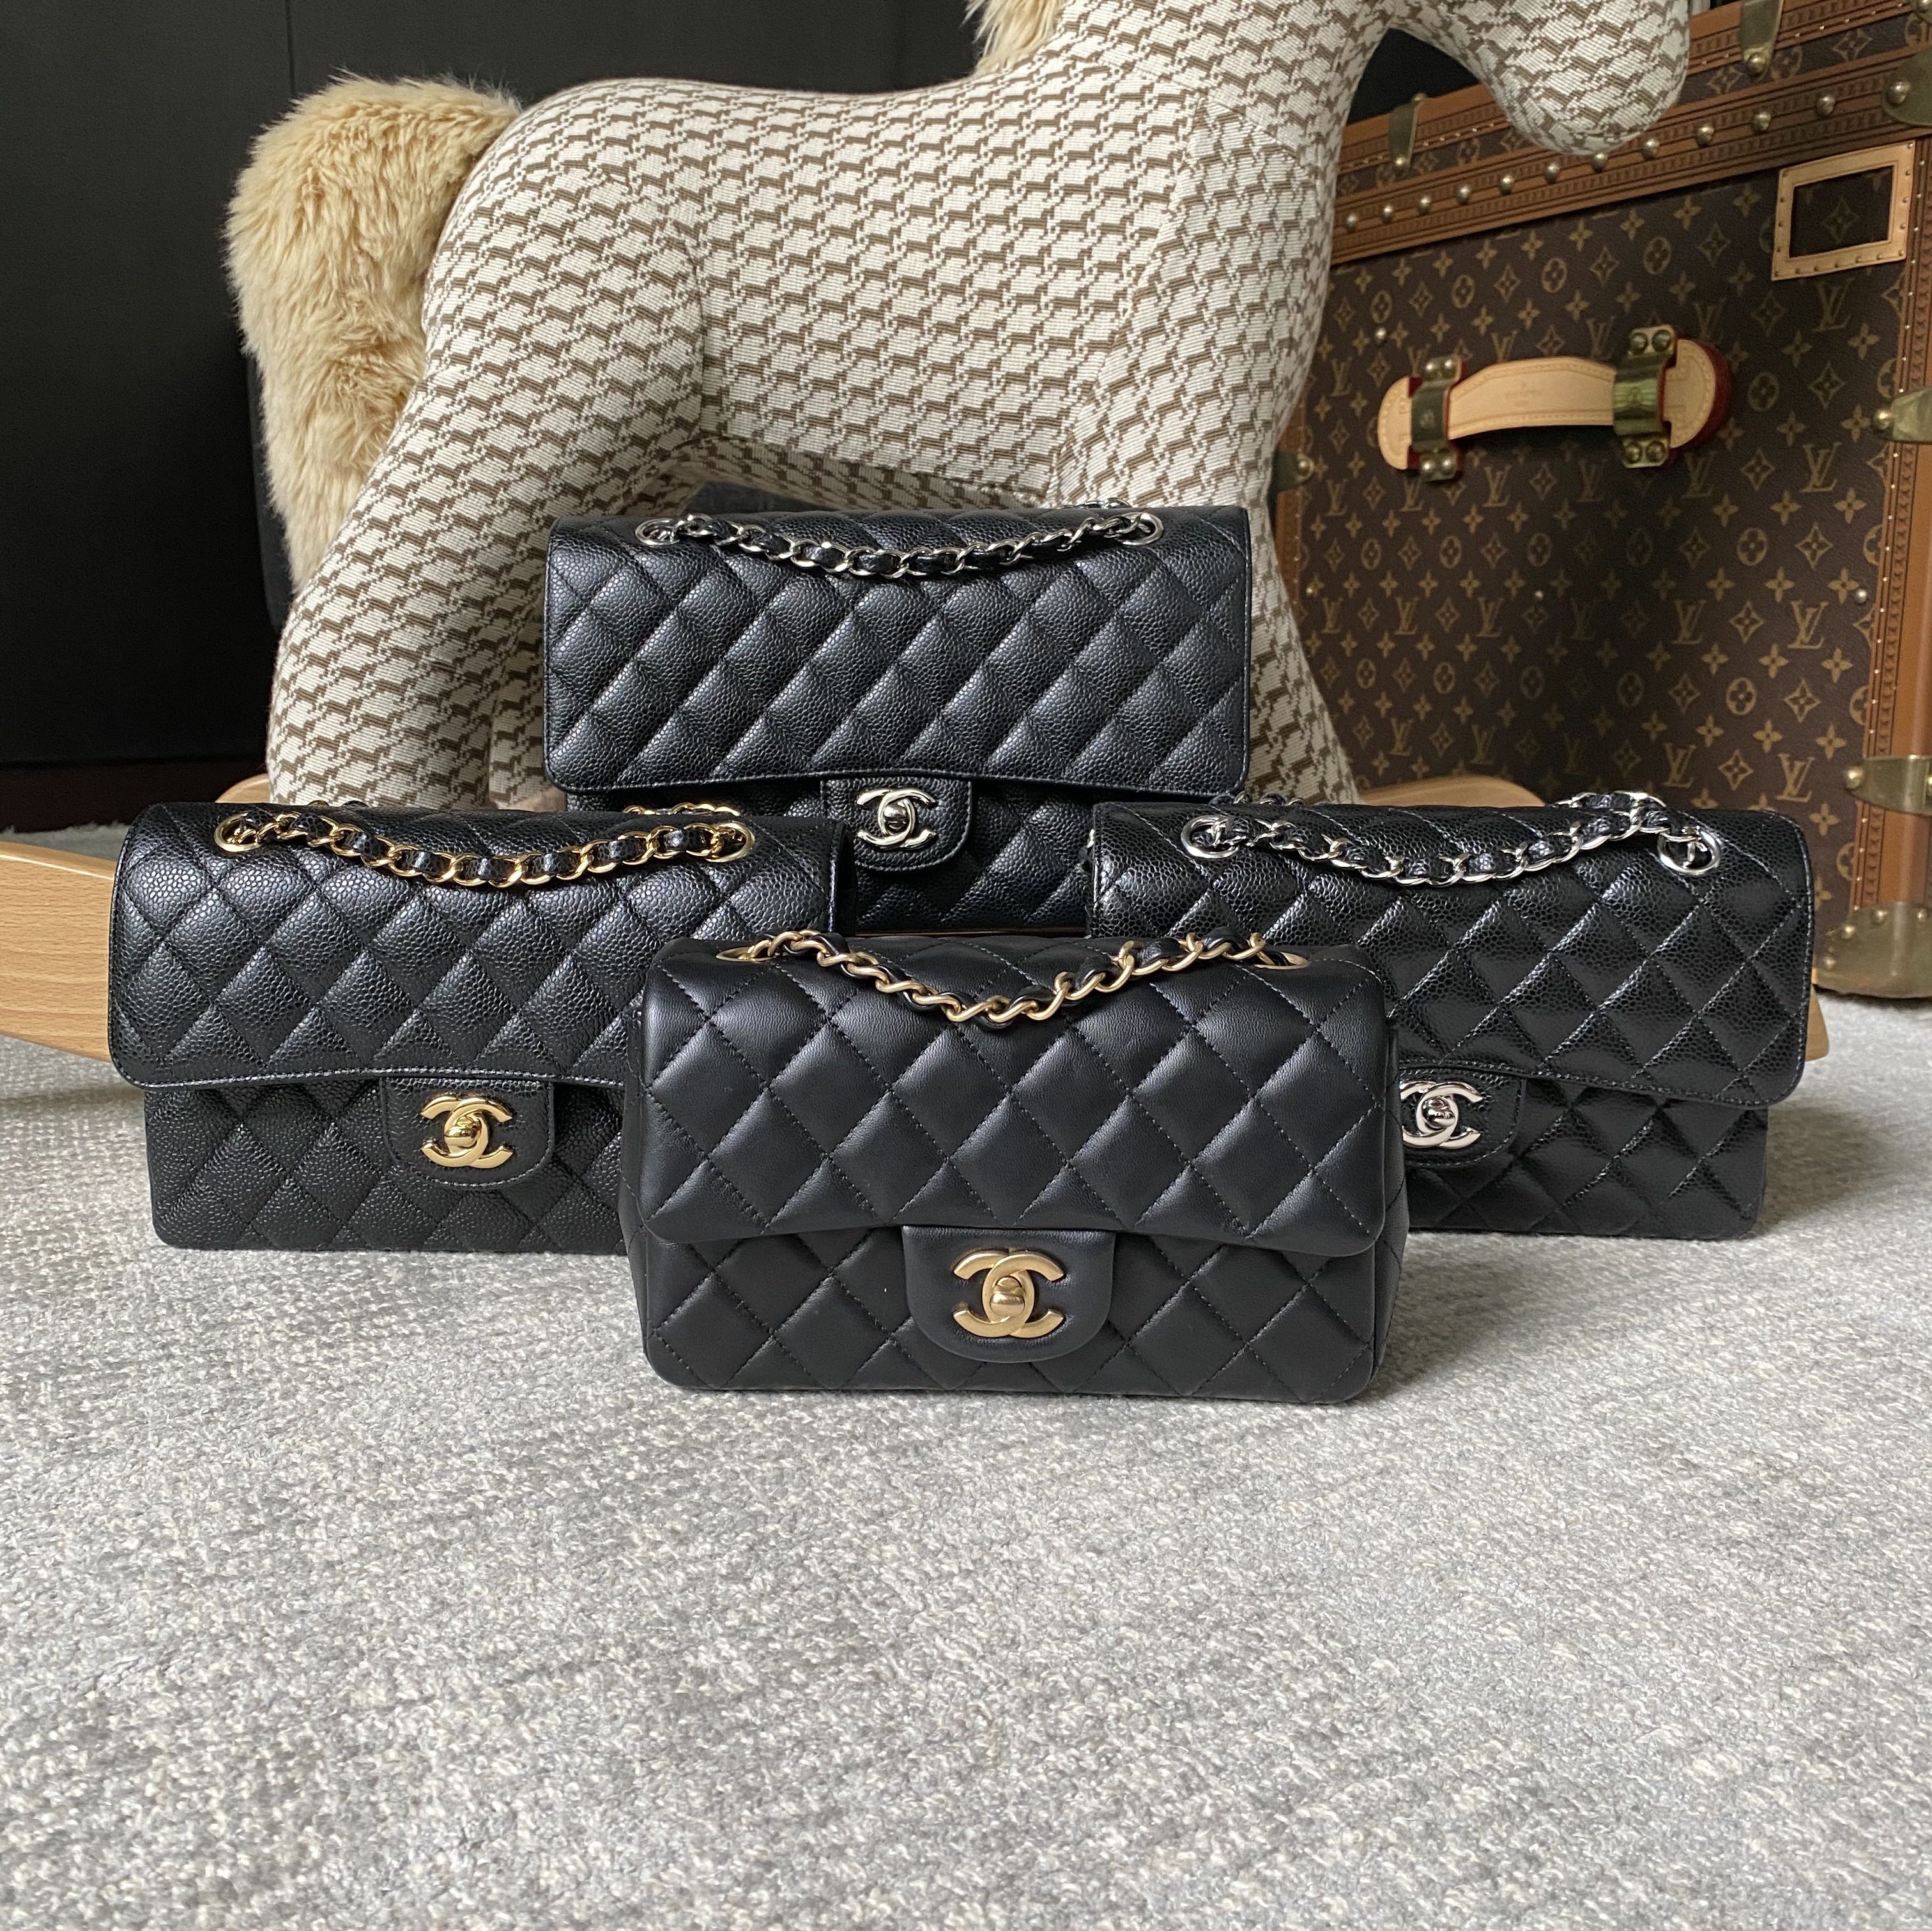 Used Chanel Jackets  Chanel Bags and Clothing  CODOGIRL